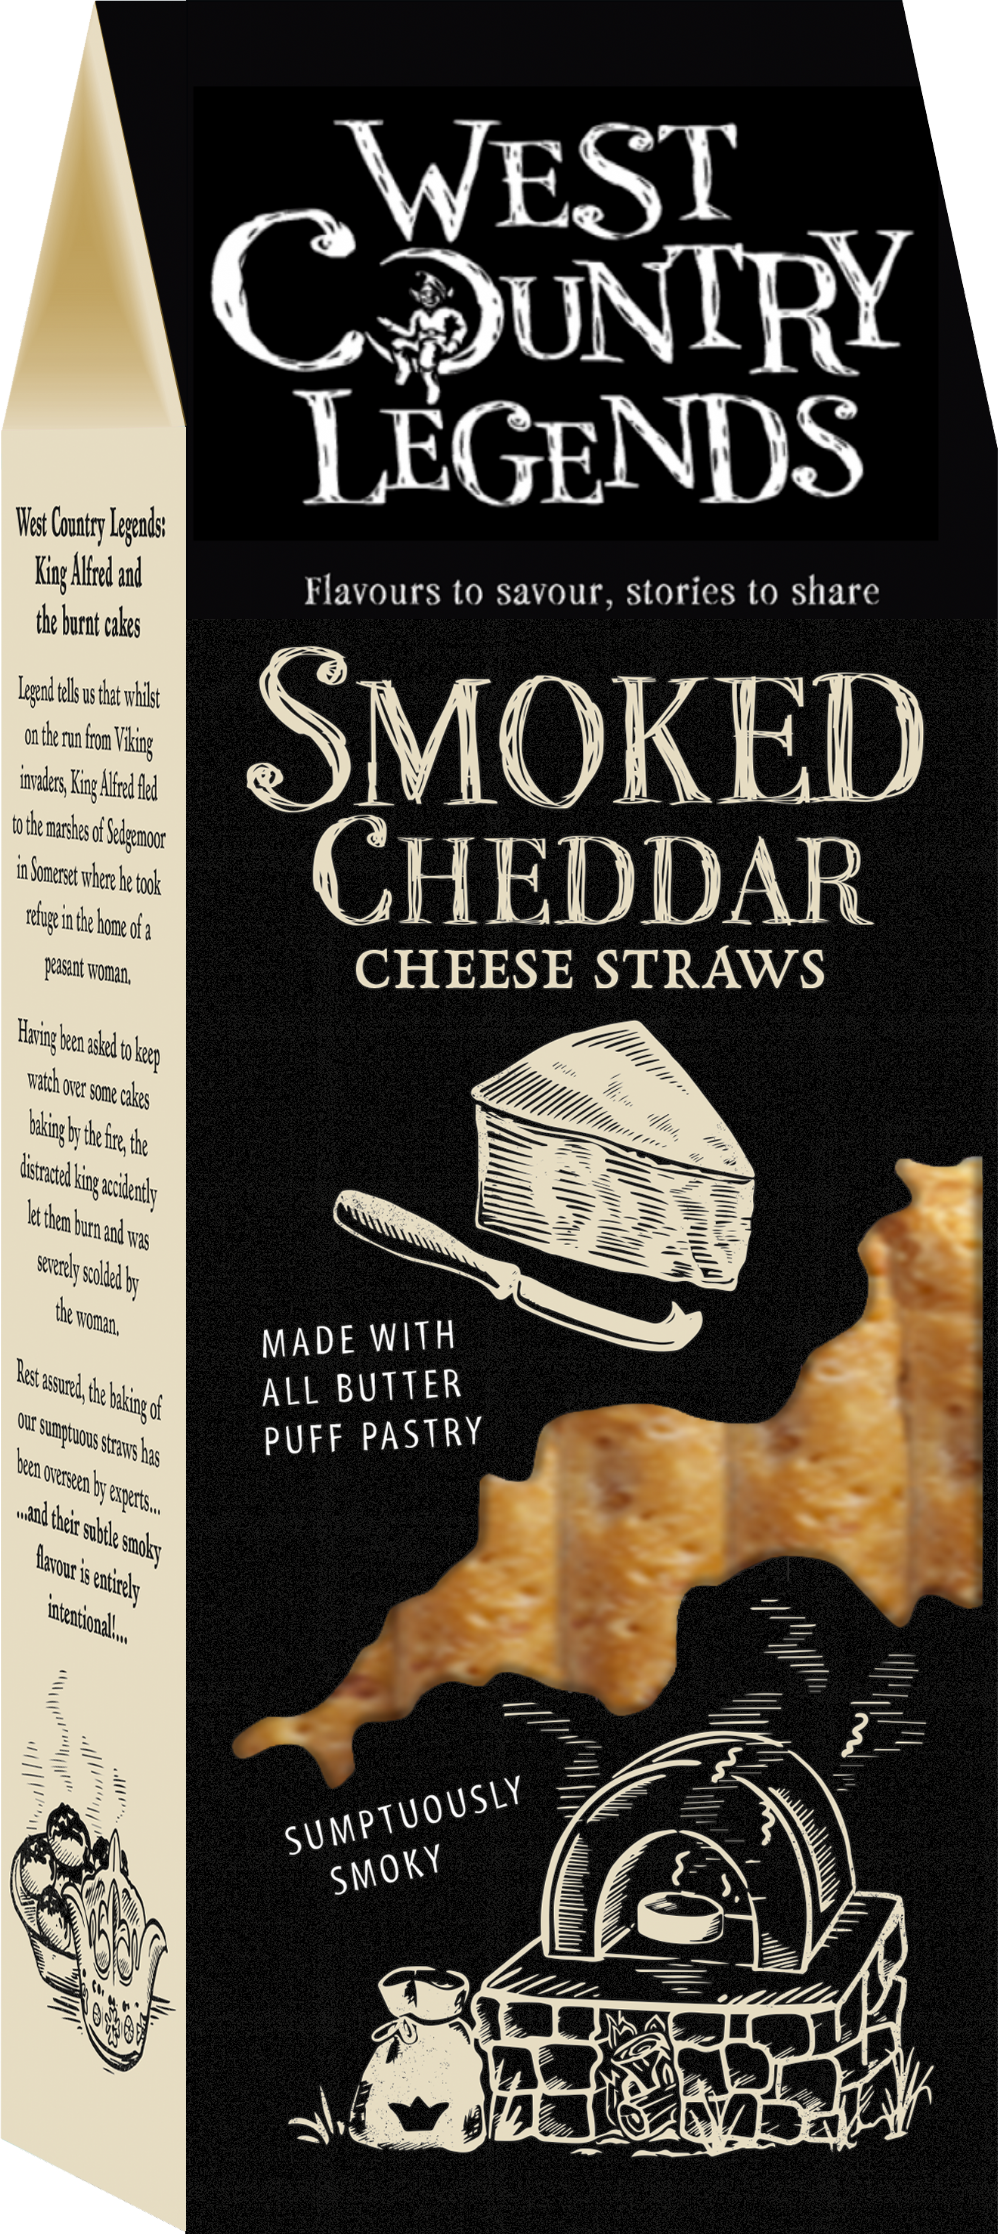 West Country Legends Smoked Cheddar Cheese Straws